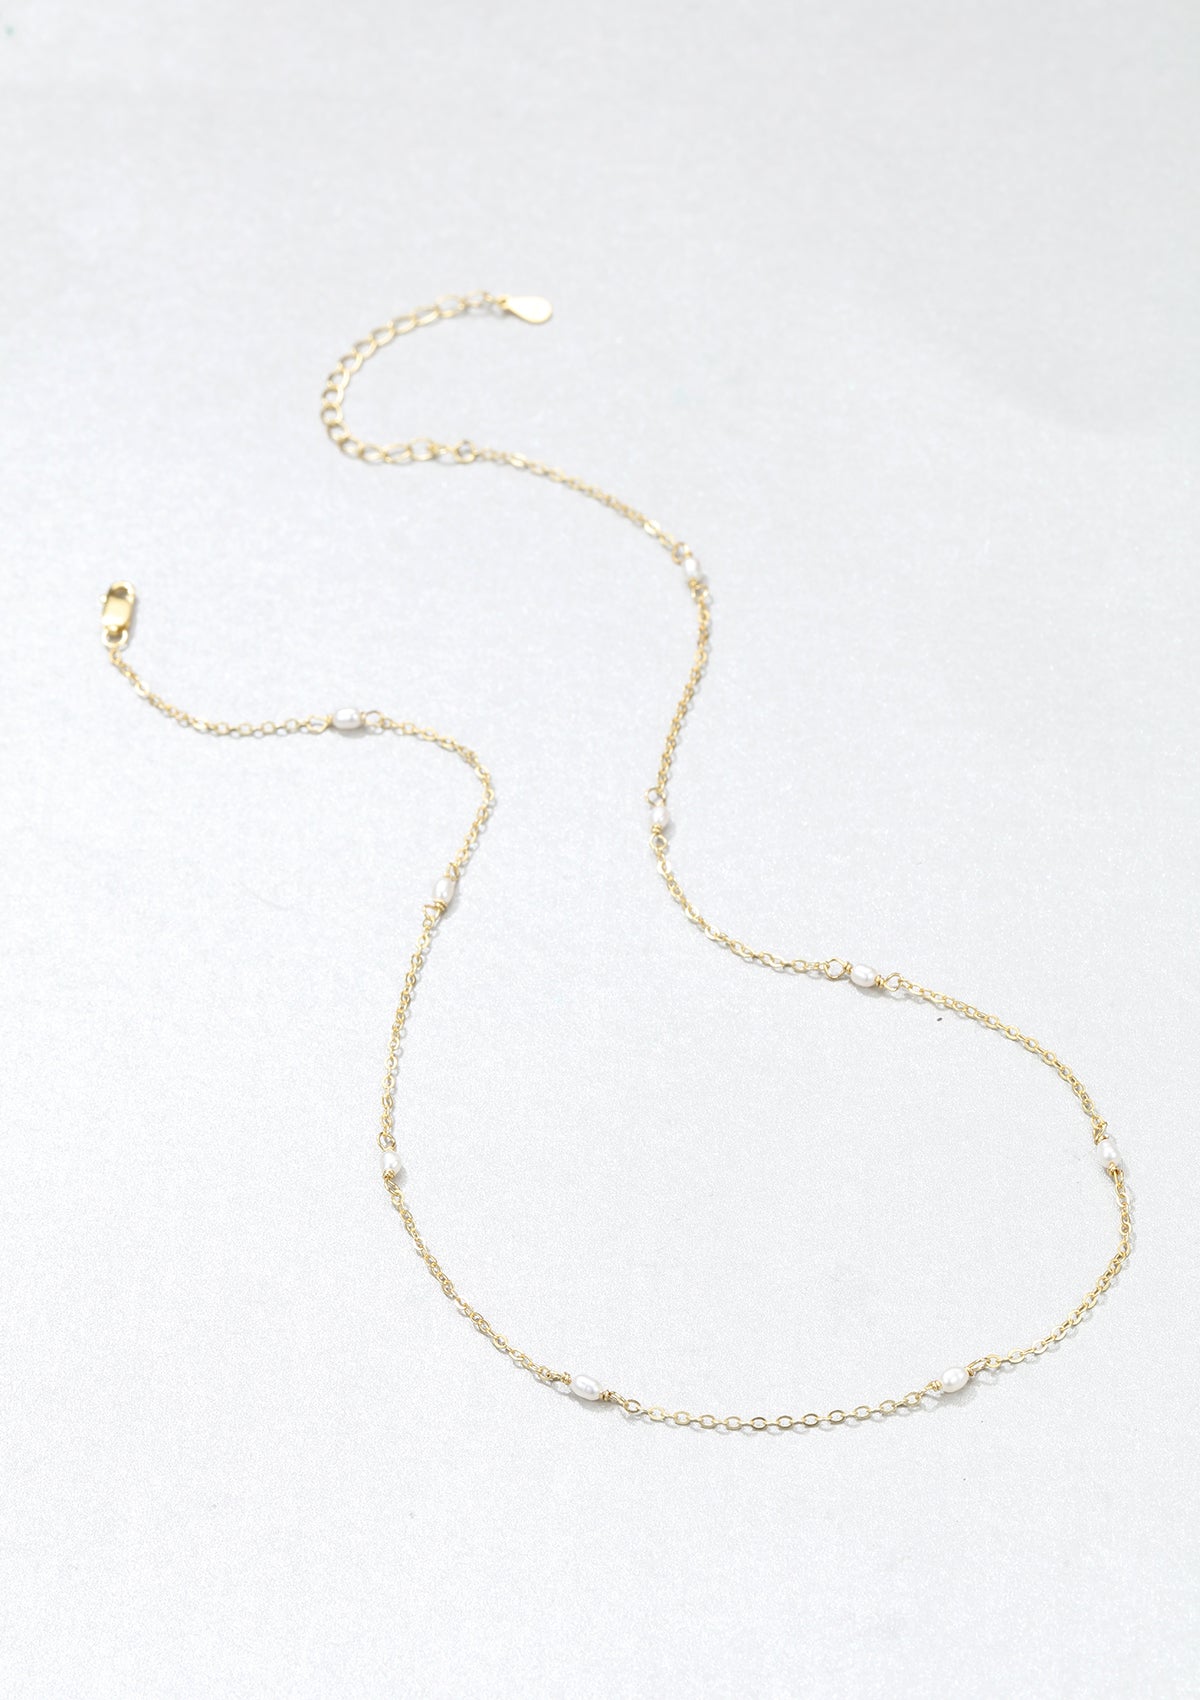 Pearl Chain Necklace Sterling Silver Gold